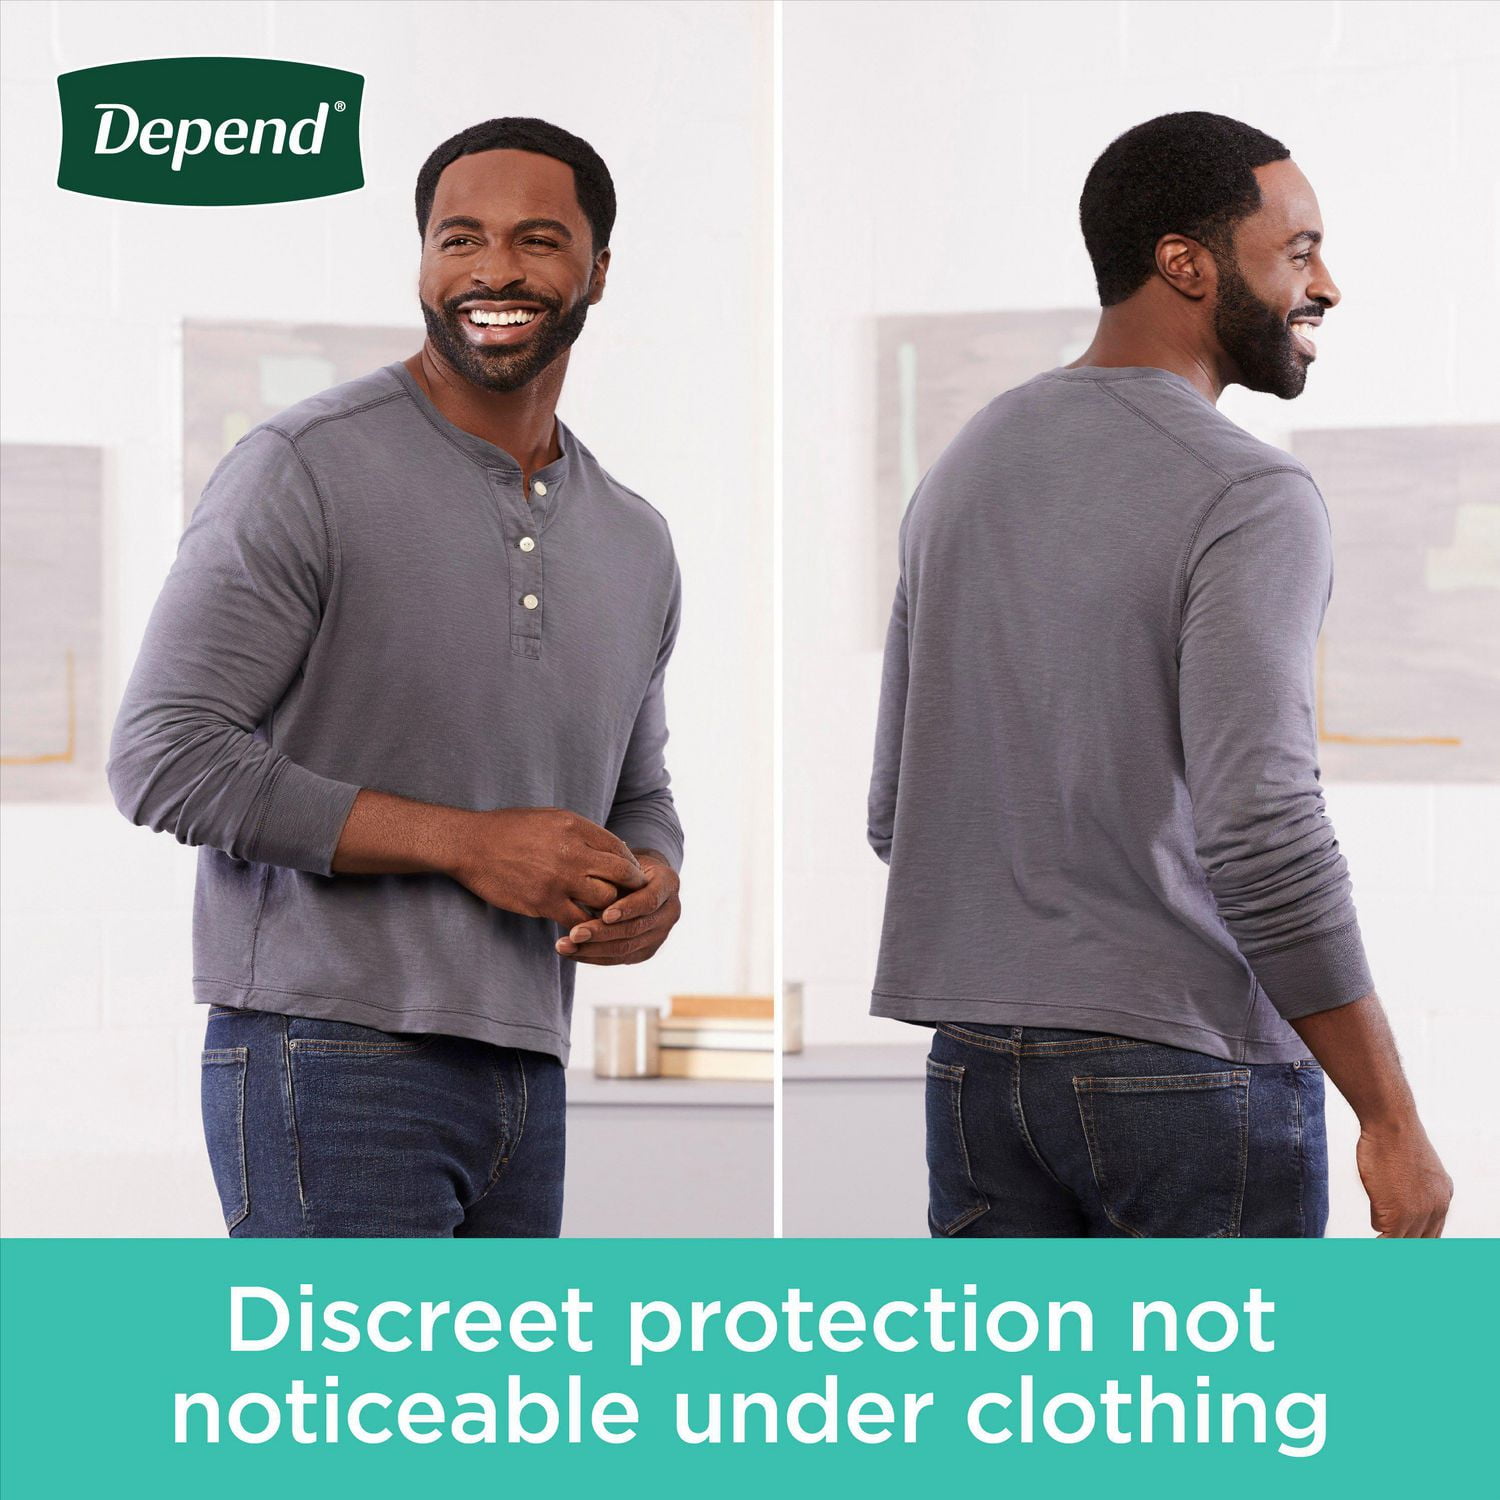 Depend Fresh Protection Adult Incontinence Underwear for Women, Small -  Blush, 92 ct.